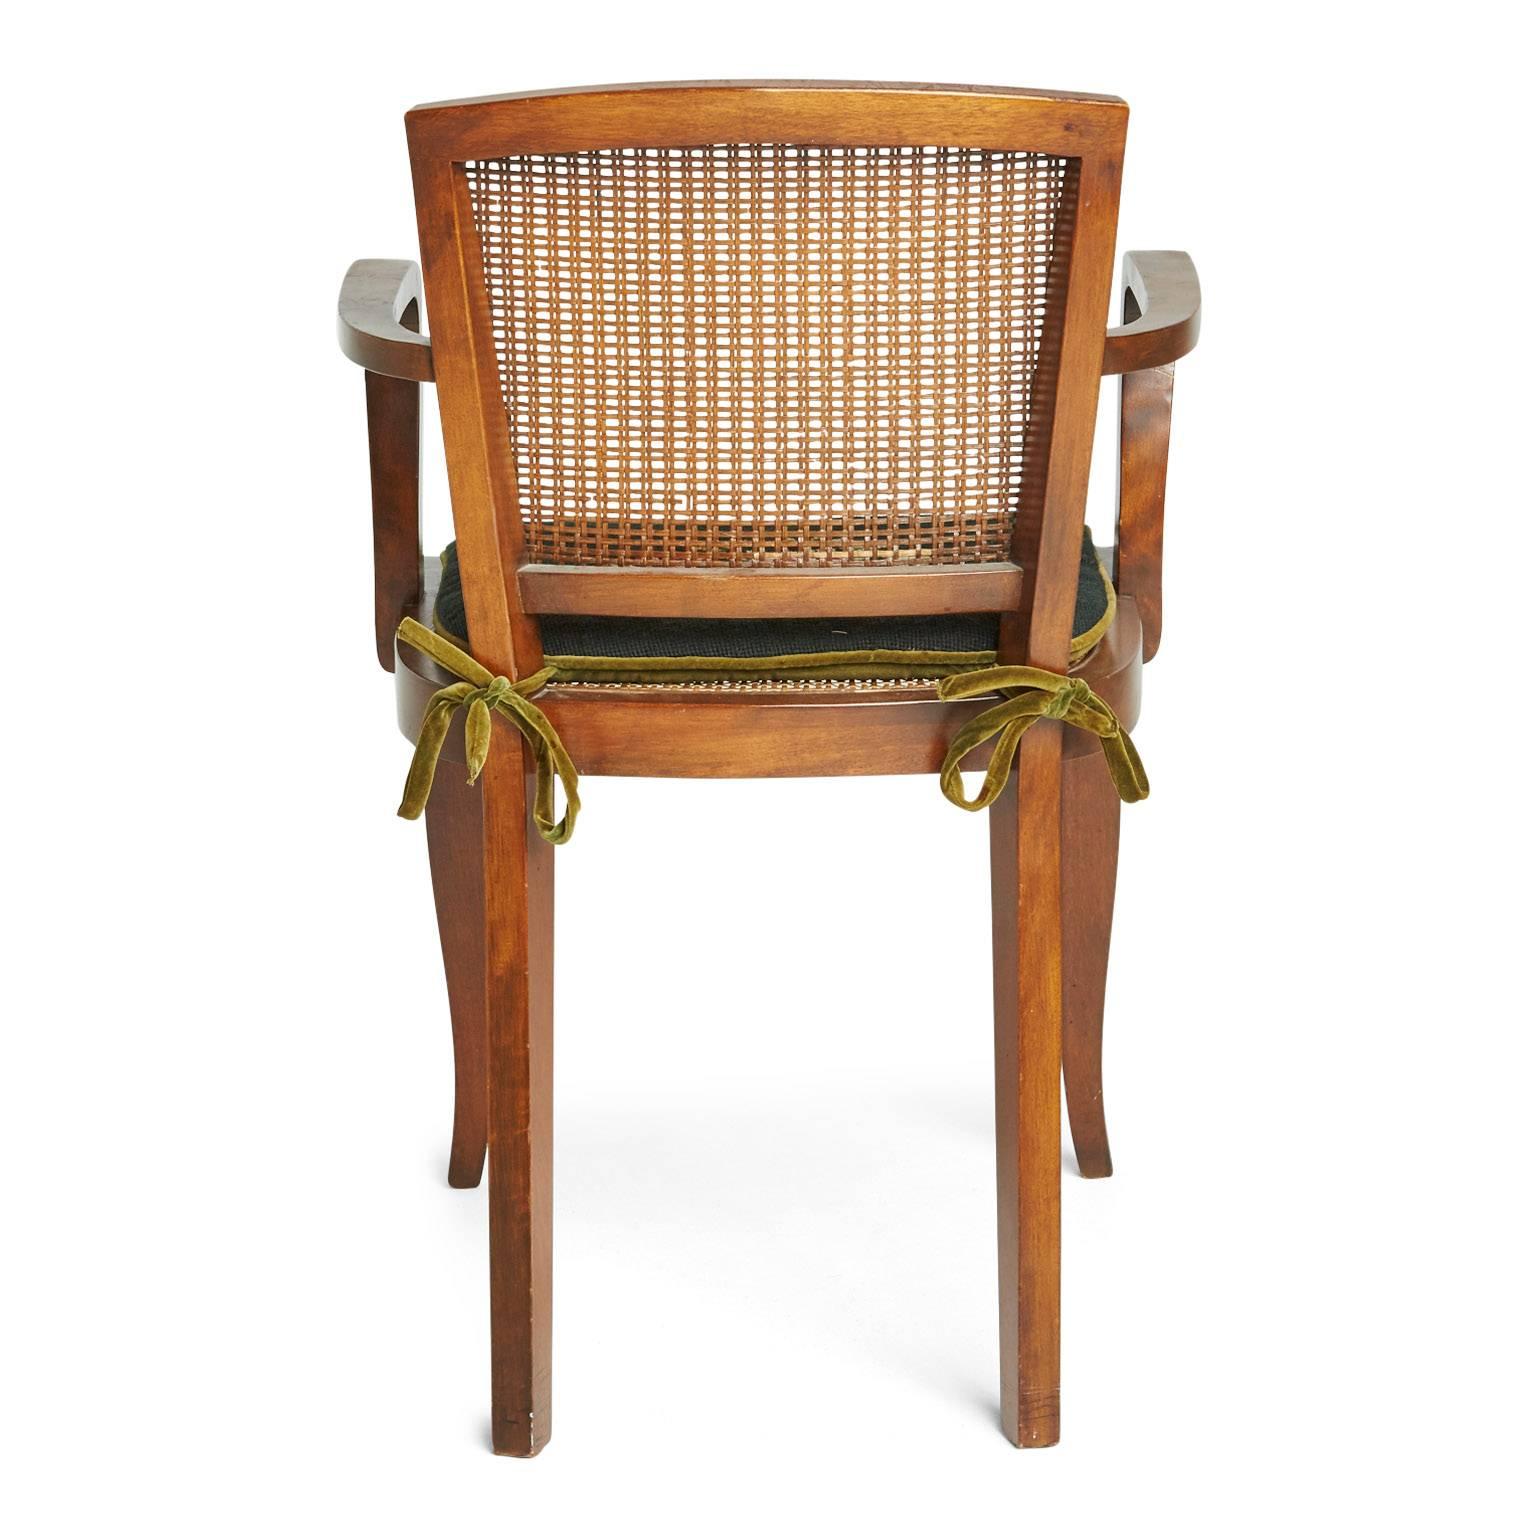 Art Deco armchair of slender proportions with caned back and seat. This chair also features a handcrafted needlepoint cushion with floral detail as well as contrast dark chartreuse velvet welting, reverse side and tie backs. The hand woven caning is